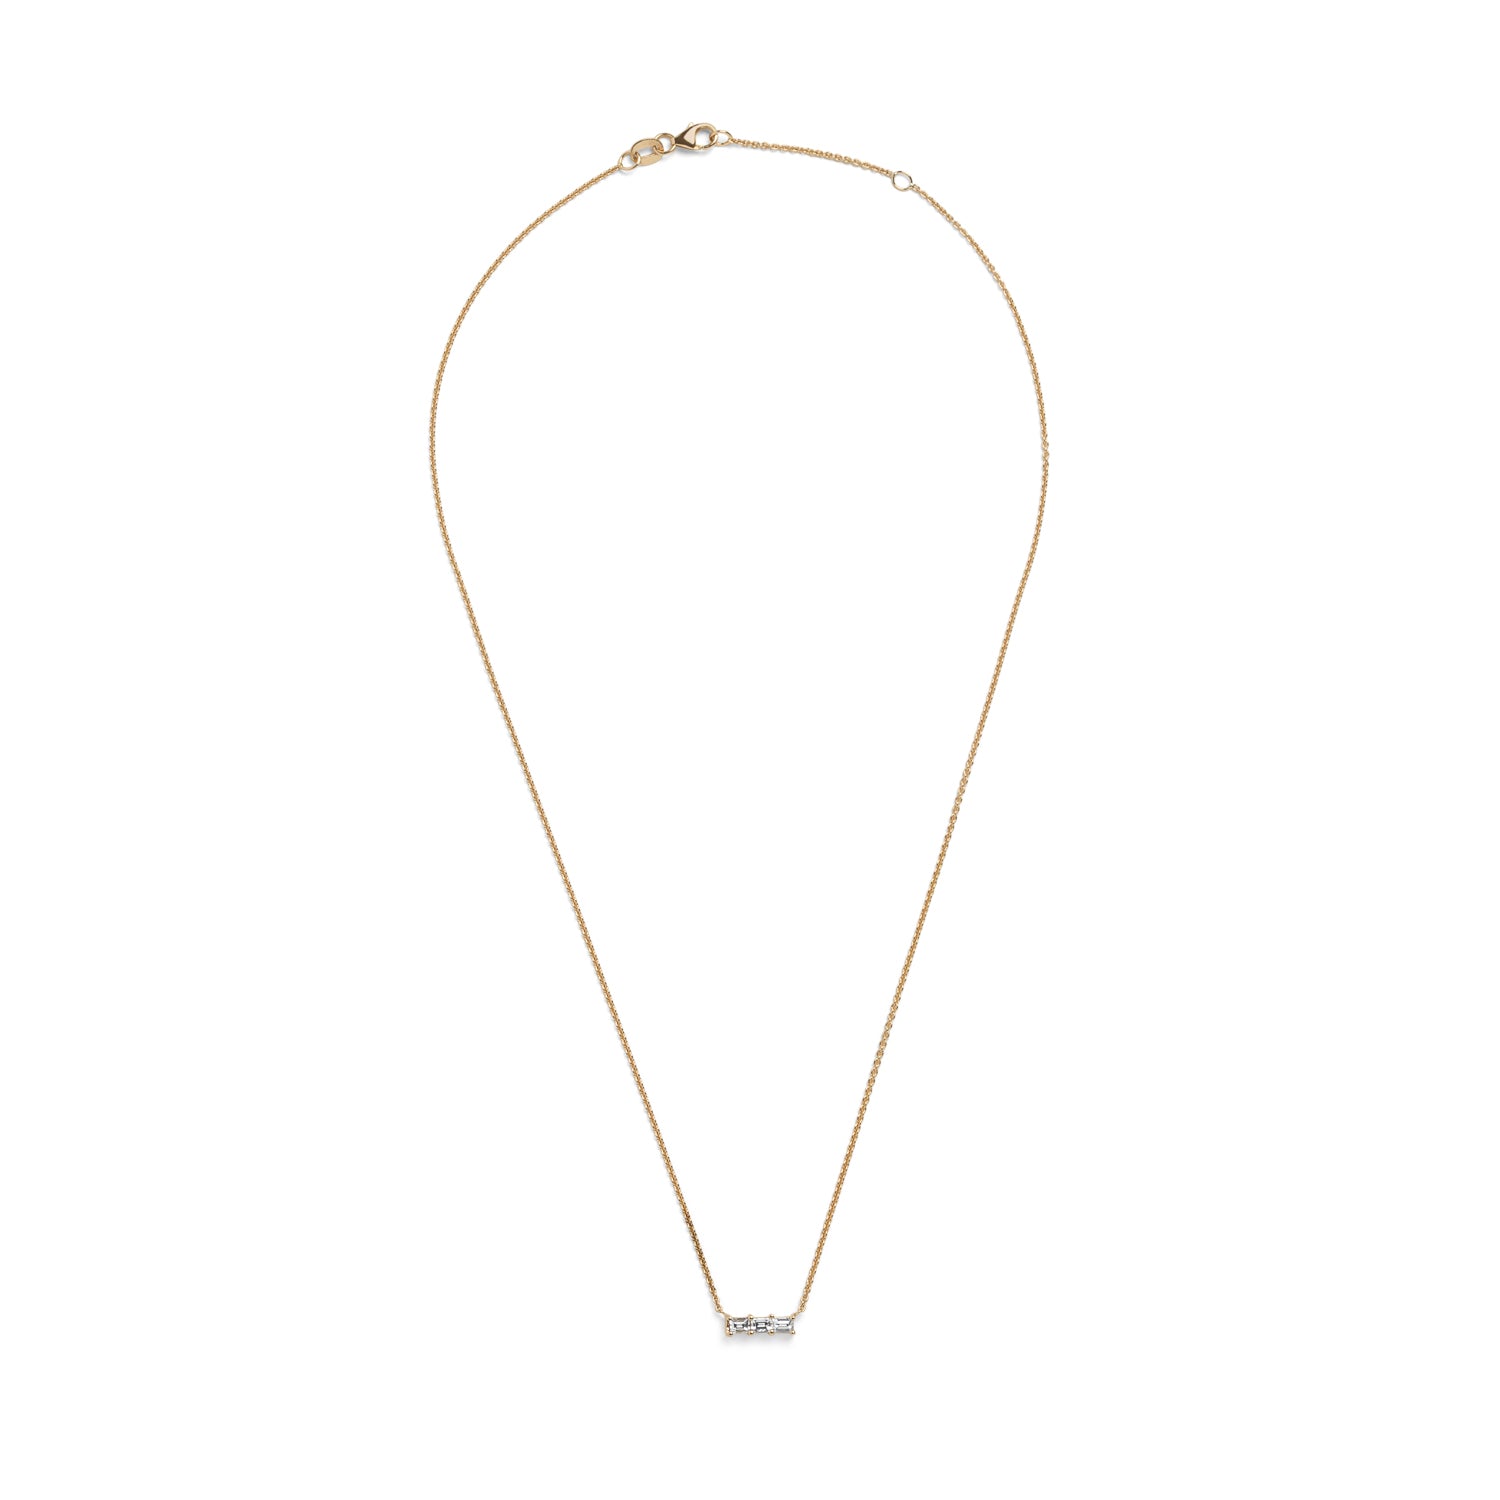 Selin Kent 14K Rhea Necklace with Three White Diamond Baguettes